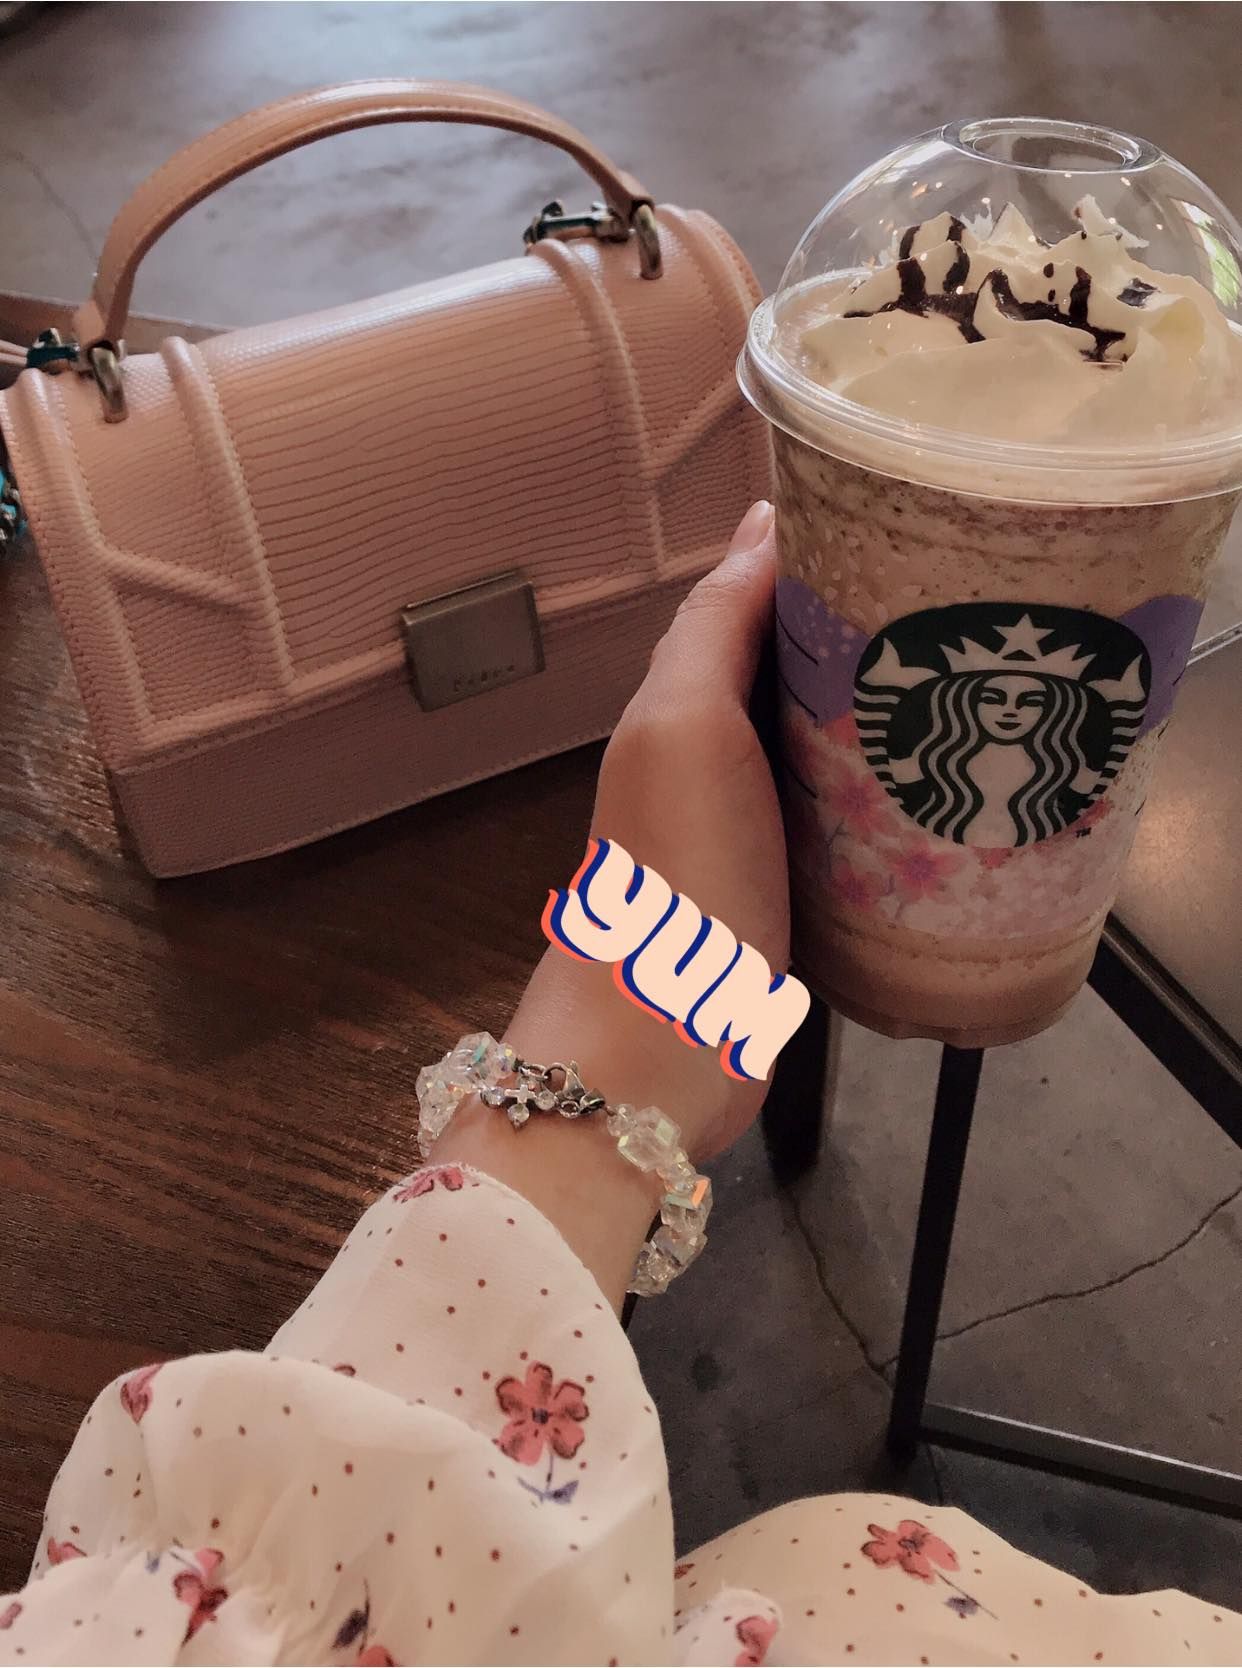 tap xe ghe lien - duy nhat hom nay starbucks tung khuyen mai 2 ly chi 110k  - anh 5